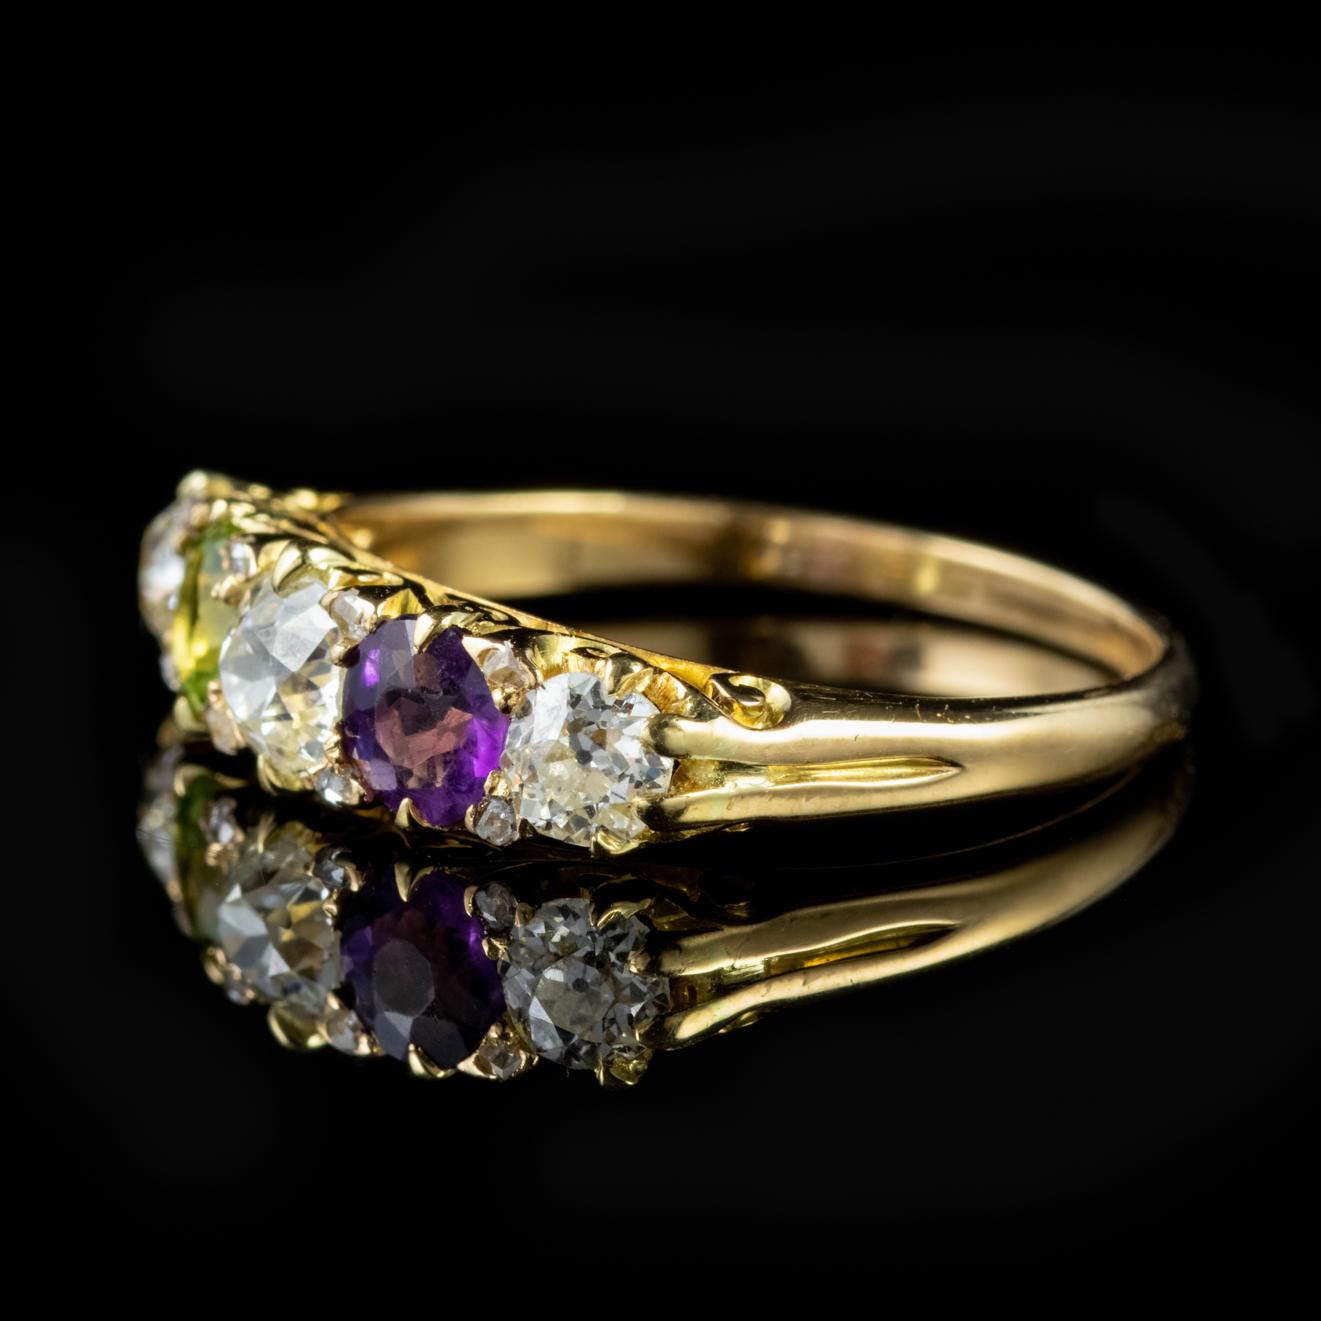 A gorgeous antique Edwardian Suffragette ring adorned with a Peridot, Amethyst and three cushion cut Diamonds which are all 0.20ct each. 

Suffragette jewellery was worn to show one’s allegiance to the women’s Suffragette movement in the early 20th